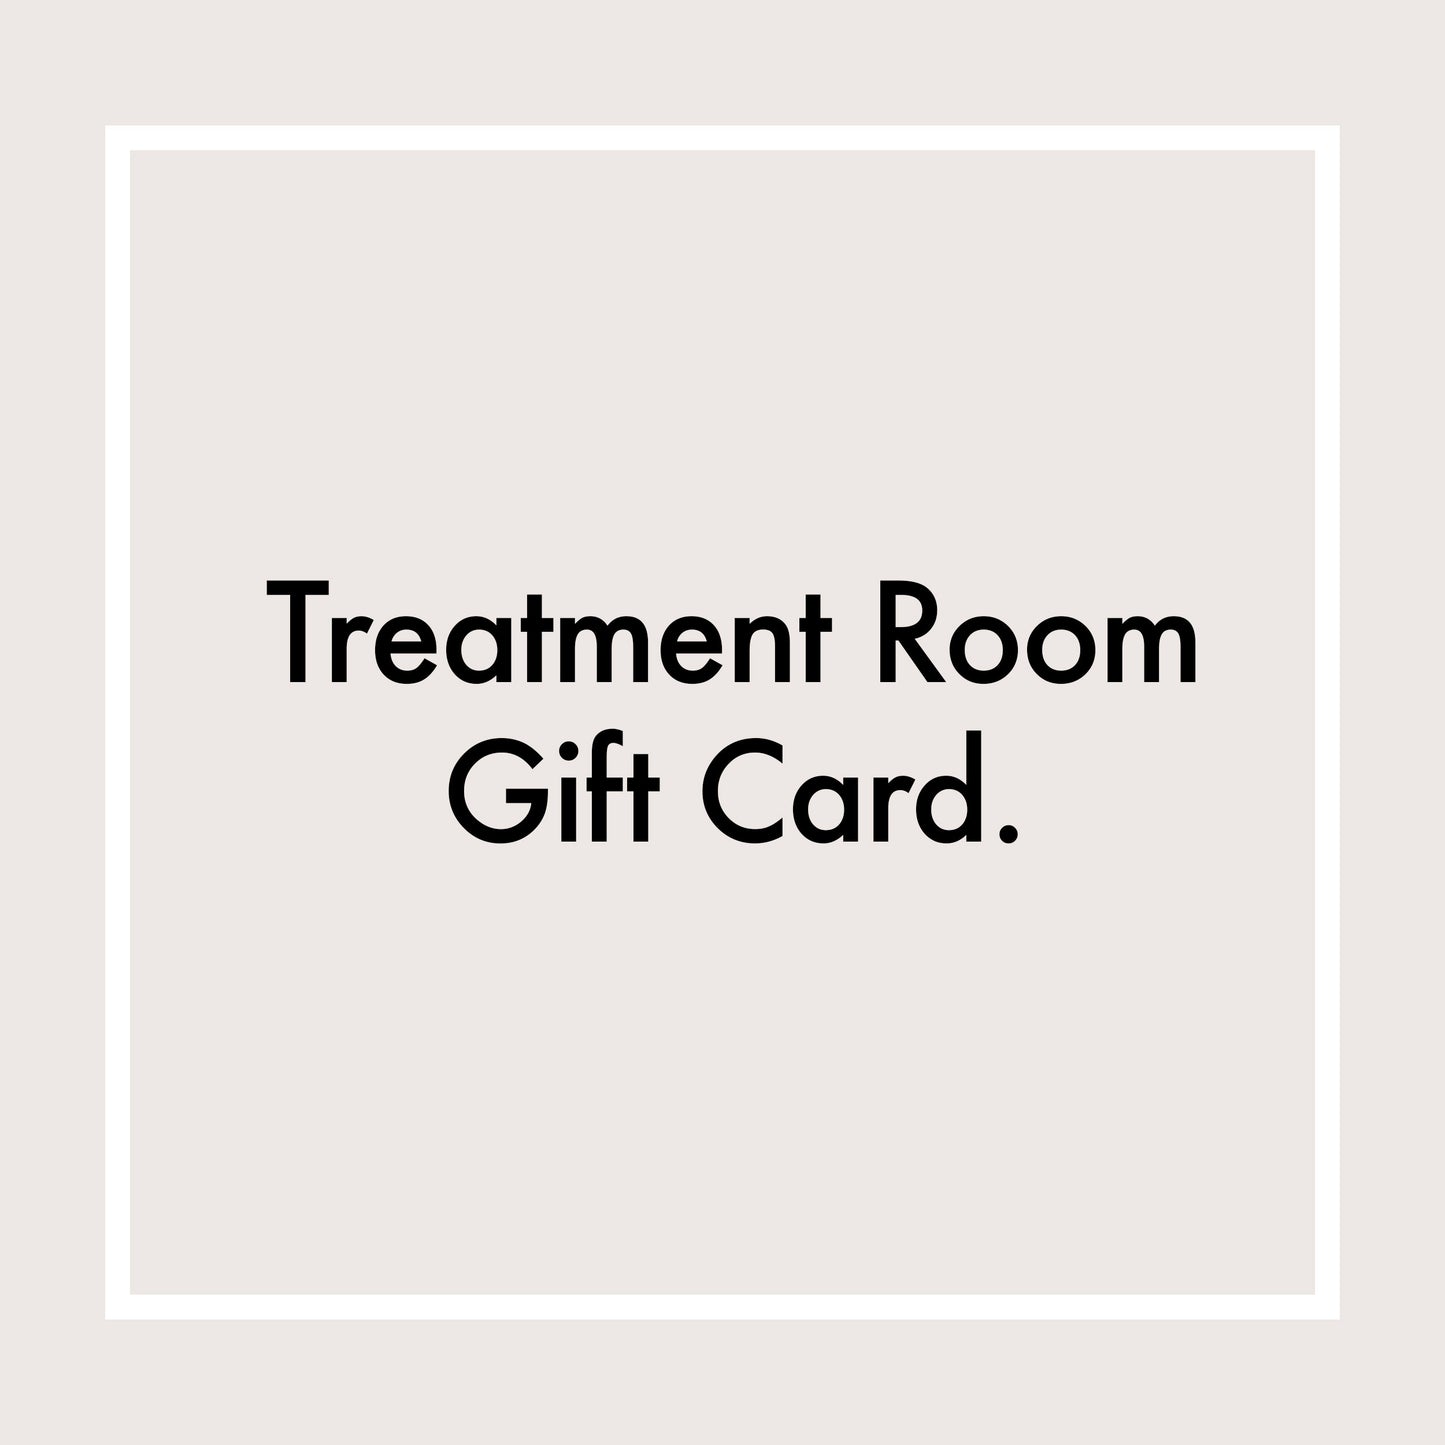 Treatment Room Gift Card